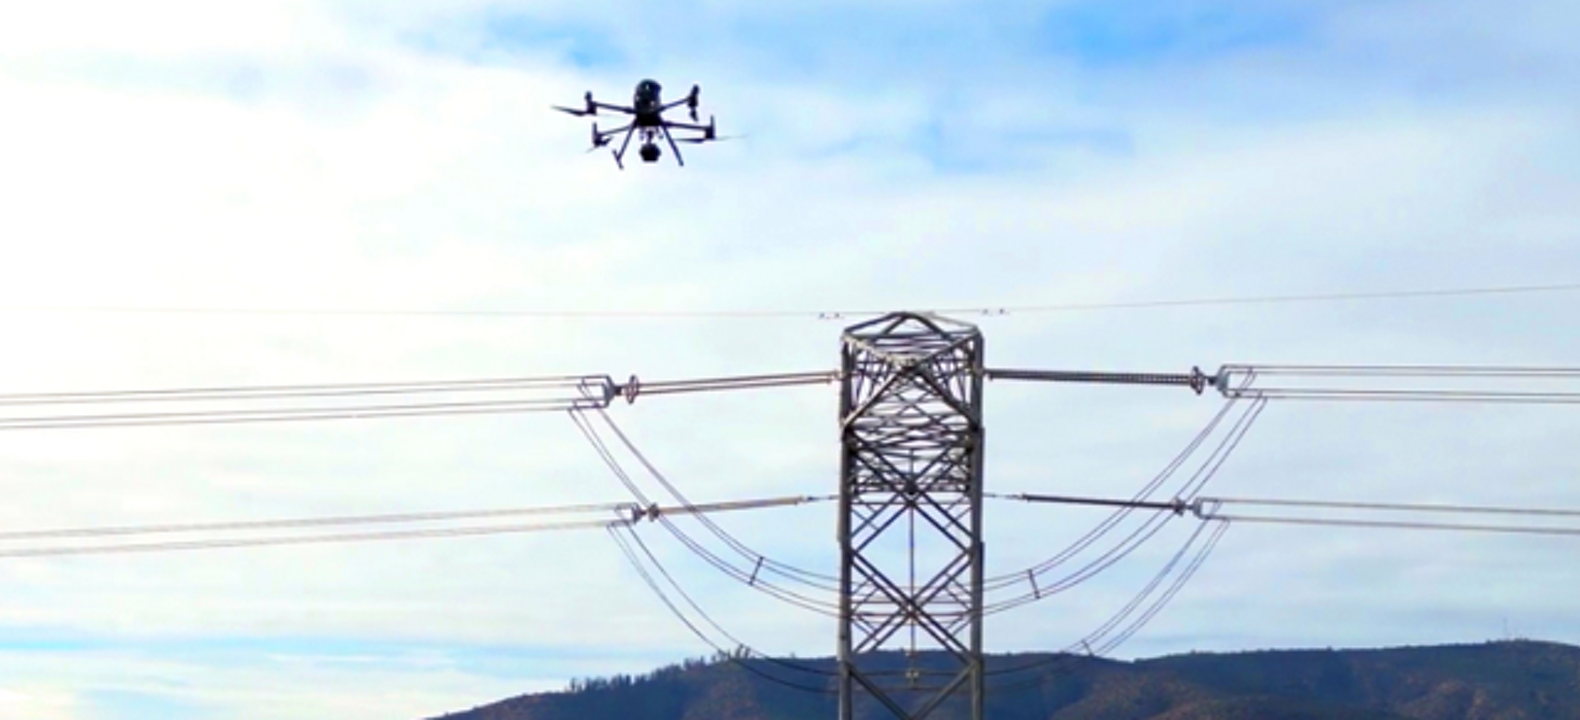 A connected drone hovers over a power-line pylon, using computer vision to help inspect the energy infrastructure.